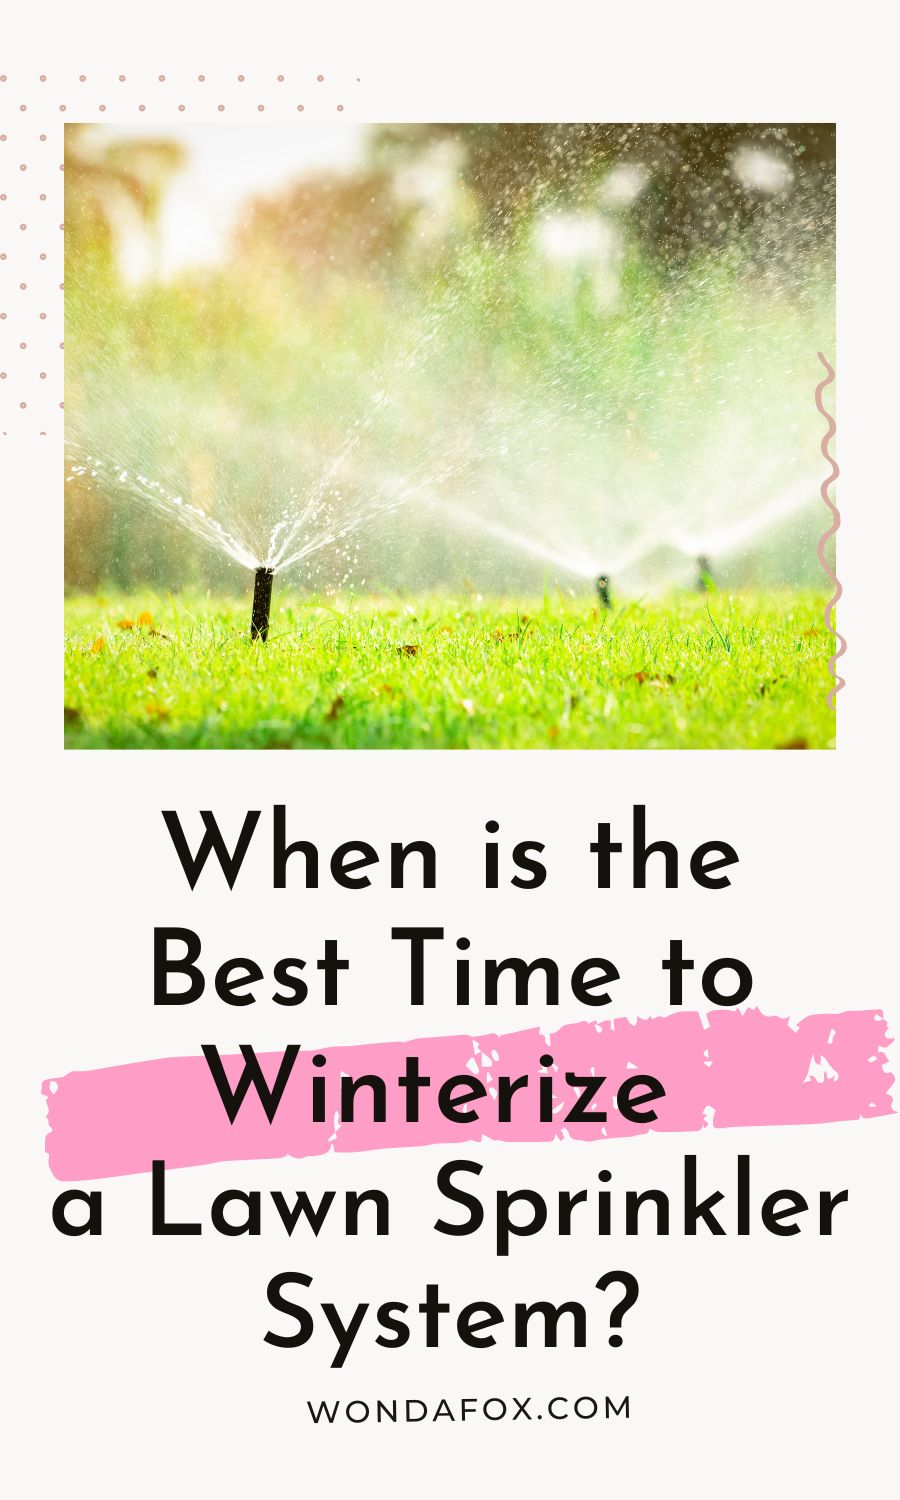 When Is The Best Time To Winterize A Lawn Sprinkler System?